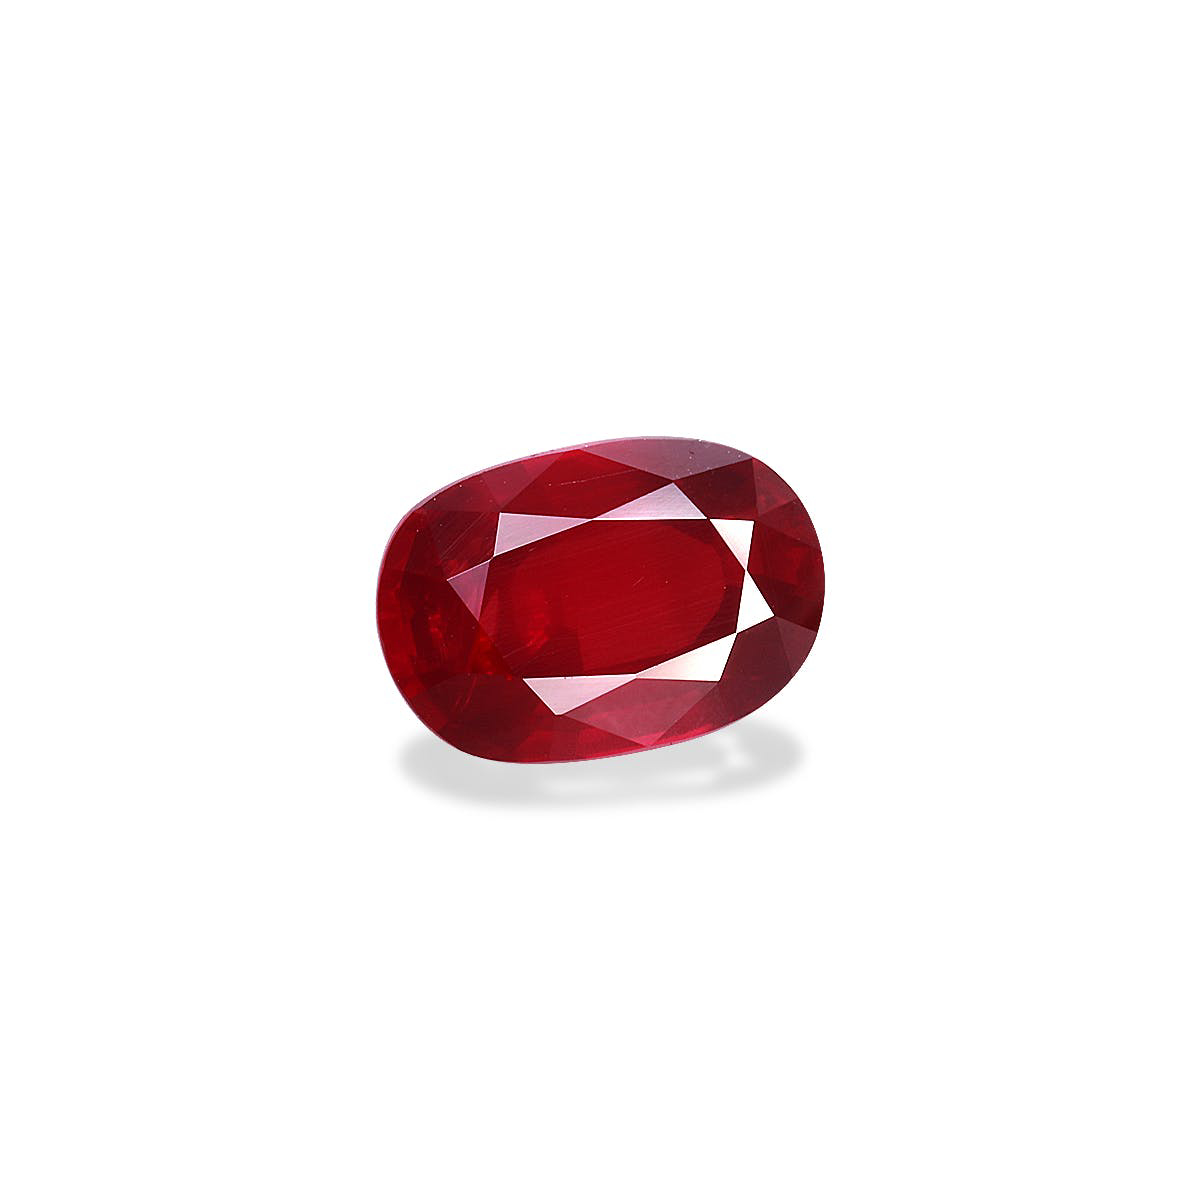 Picture of Unheated Mozambique Ruby 4.21ct (S9-22)